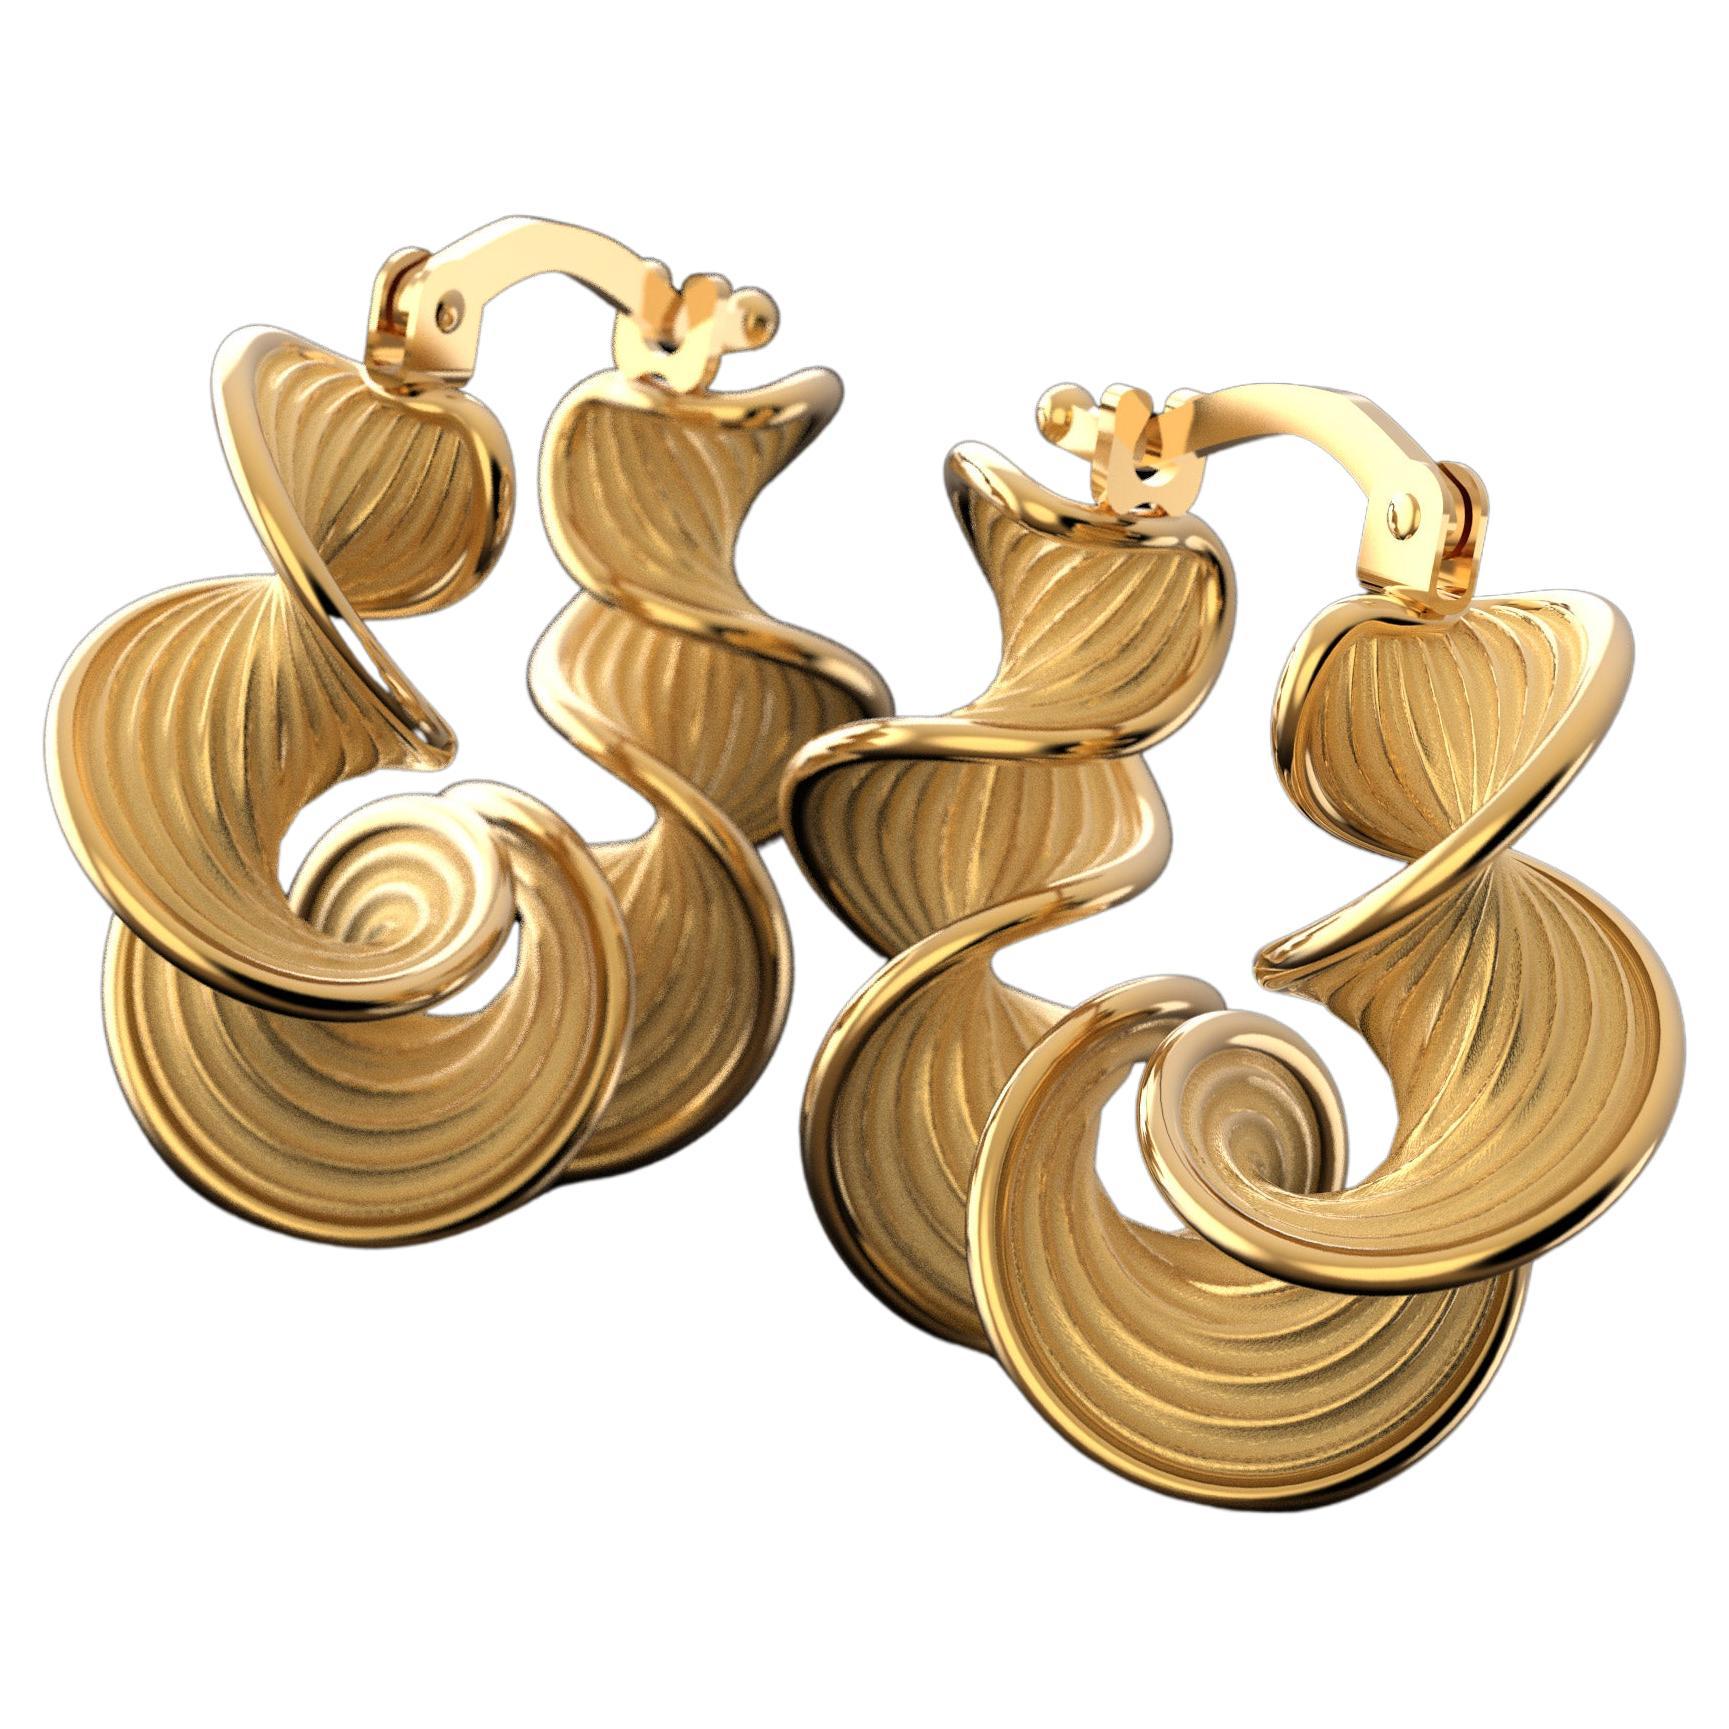 Made to order Twisted hoop earrings, designed and crafted in Italy.
The Eleganza collection is inspired by the voluptuous shapes and sinuous movements of the precious fabrics worn in fashion shows.
The Eleganza twisted hoop earring looks like a